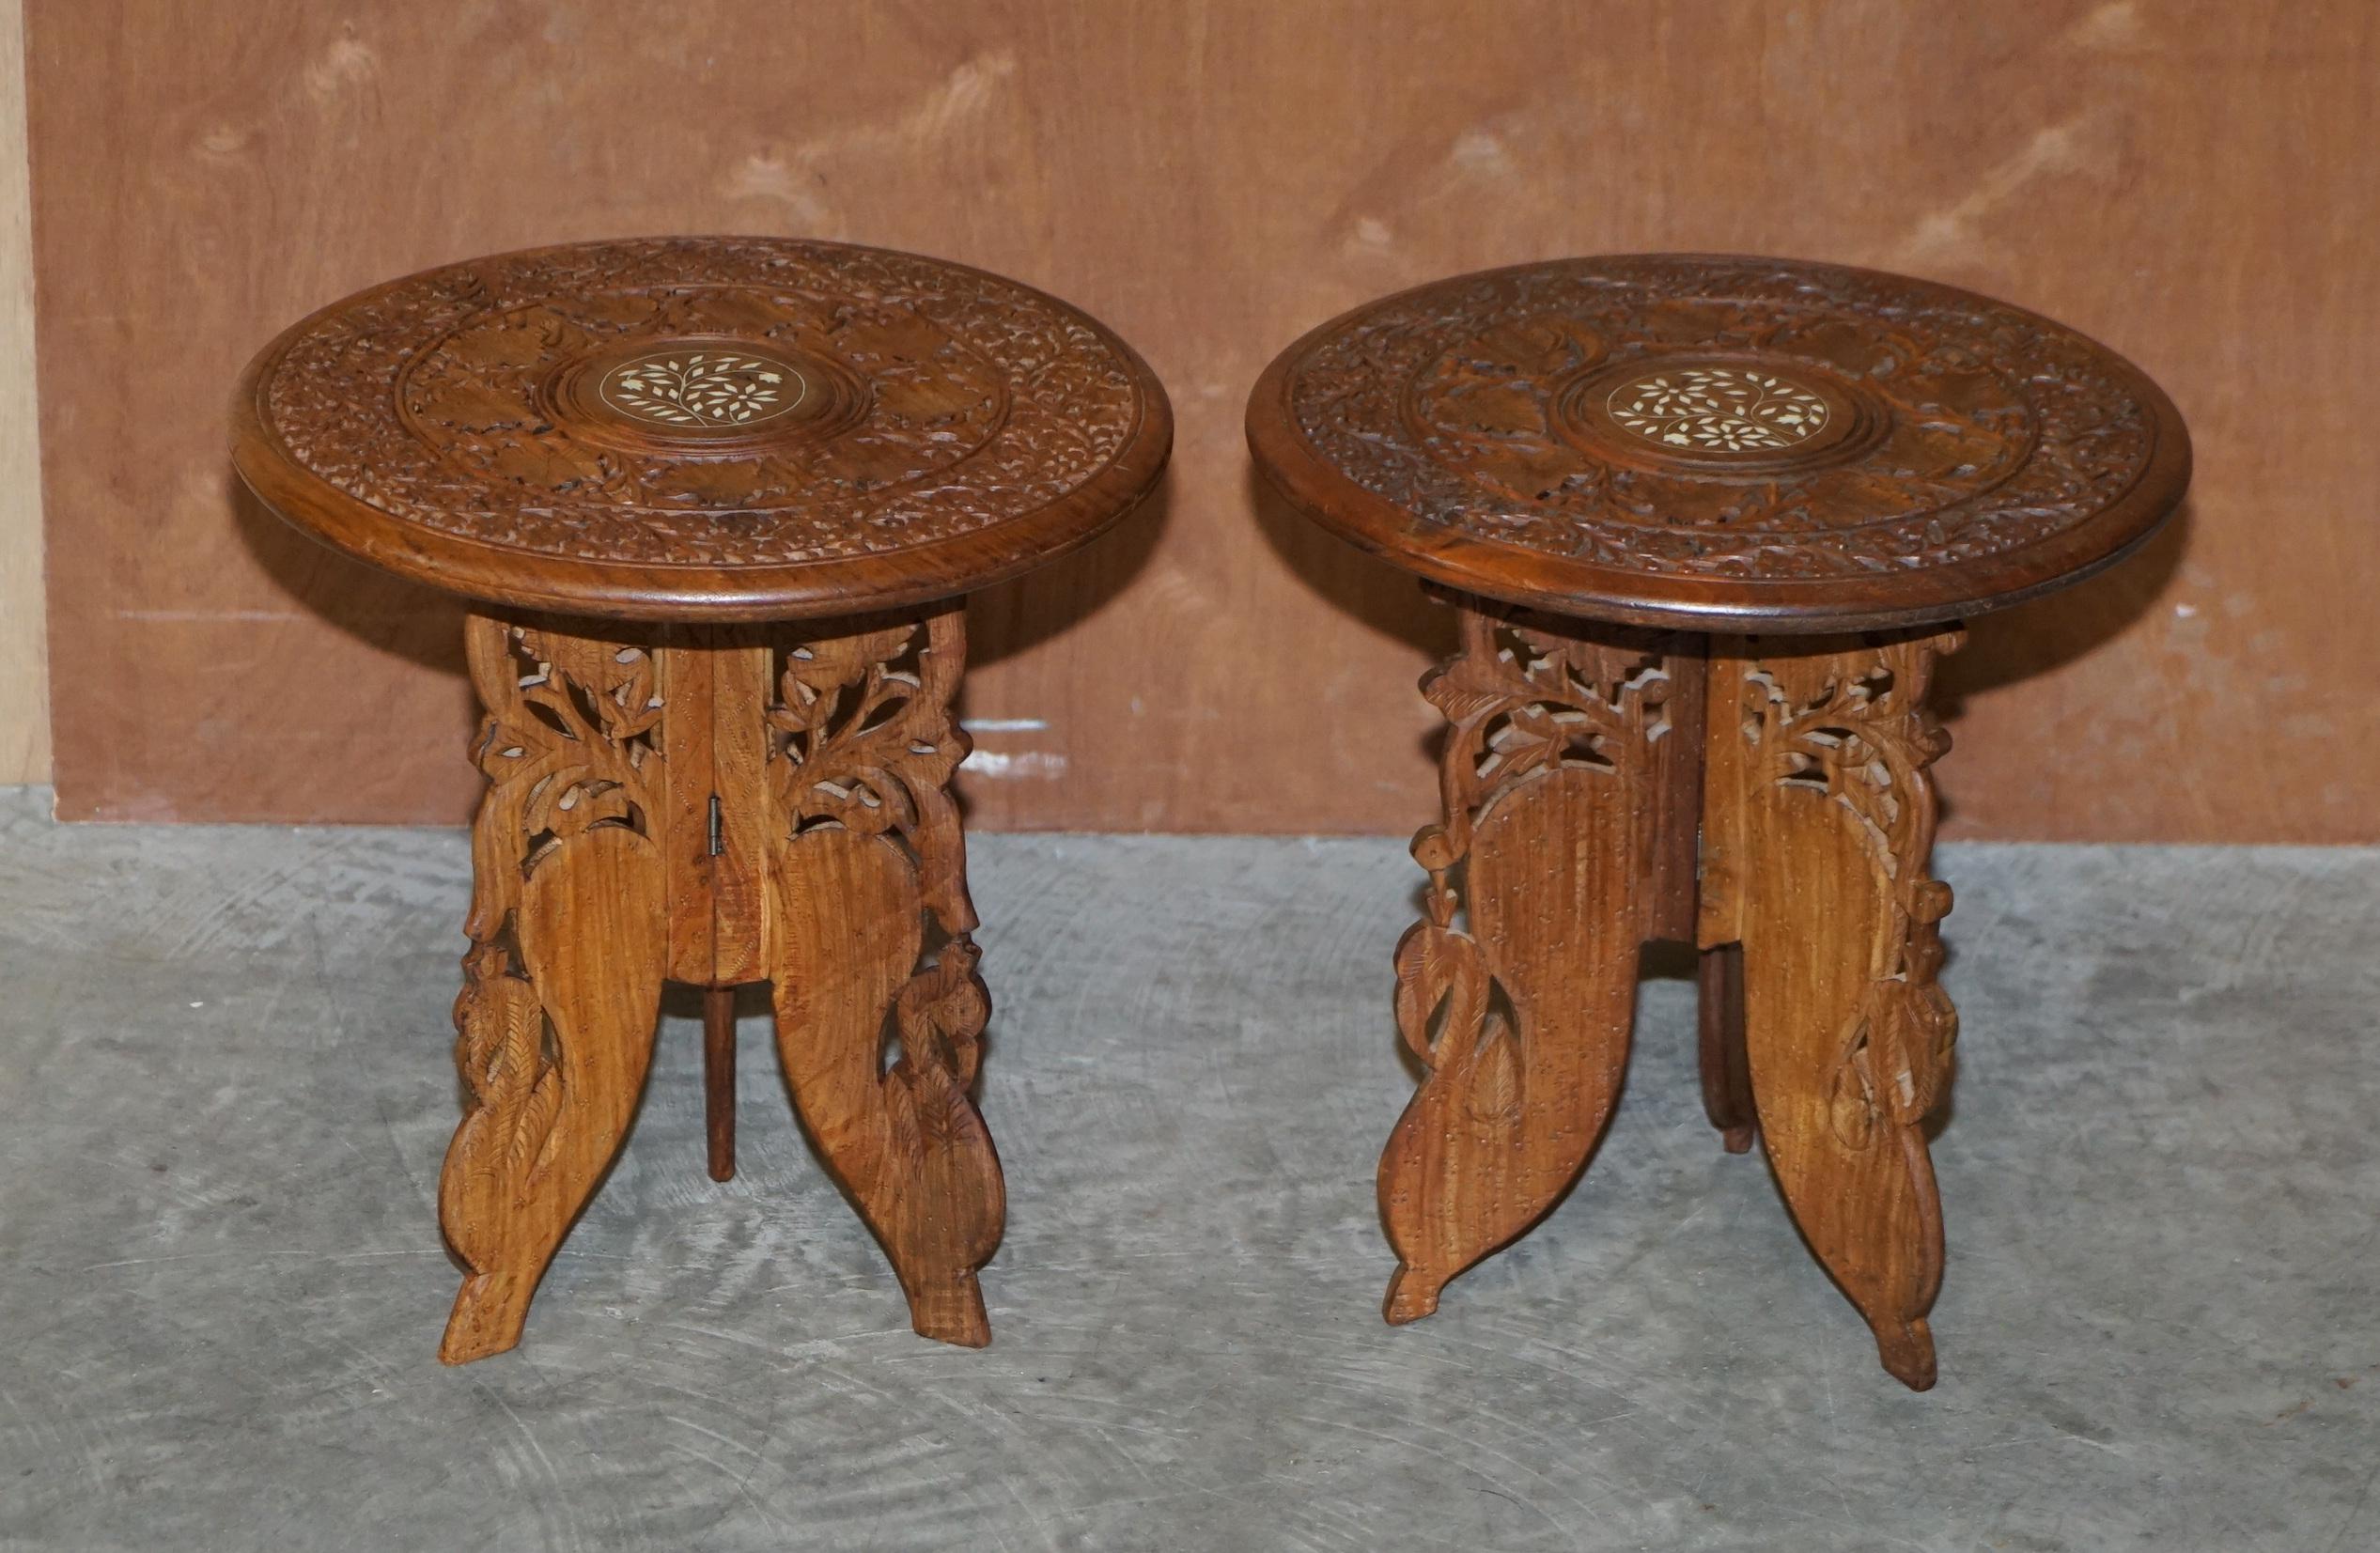 We are delighted to offer for sale this lovely pair of rare Moroccan hand carved lamp tables retailed through Liberty's London circa 1900.

These are a lovely good sized and very decorative pieces, ideally suited simply for decoration or as lamp